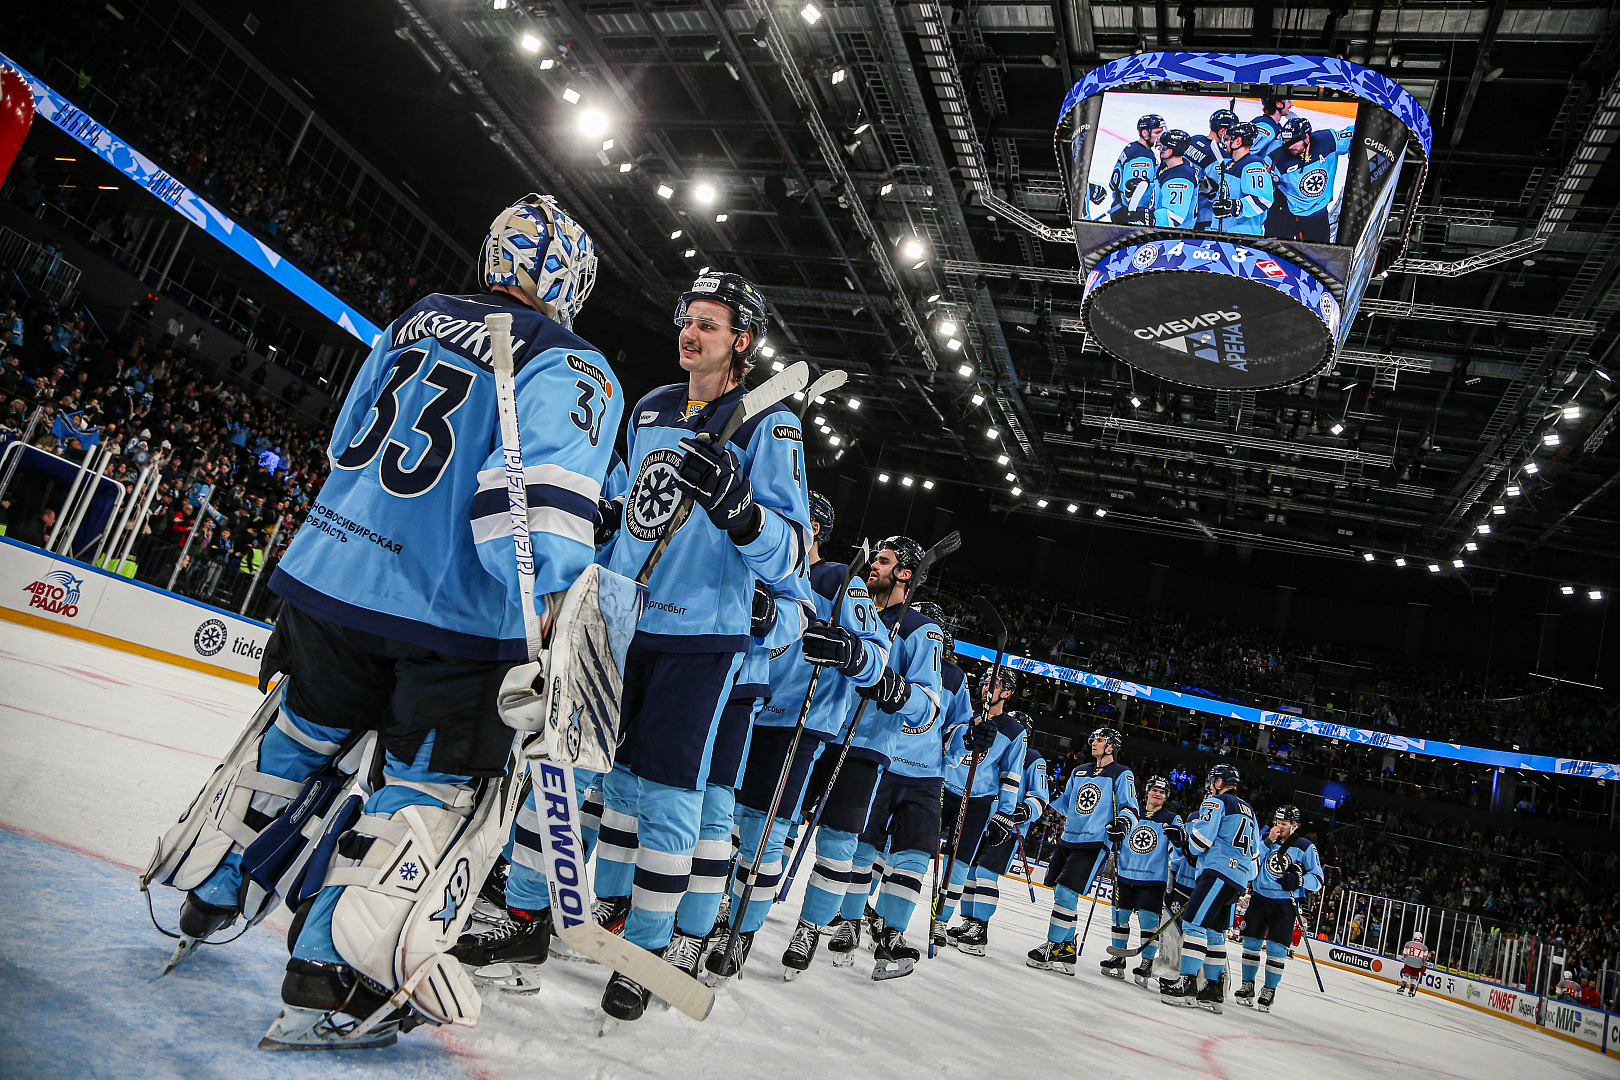 Sibir records fourth win in a row!